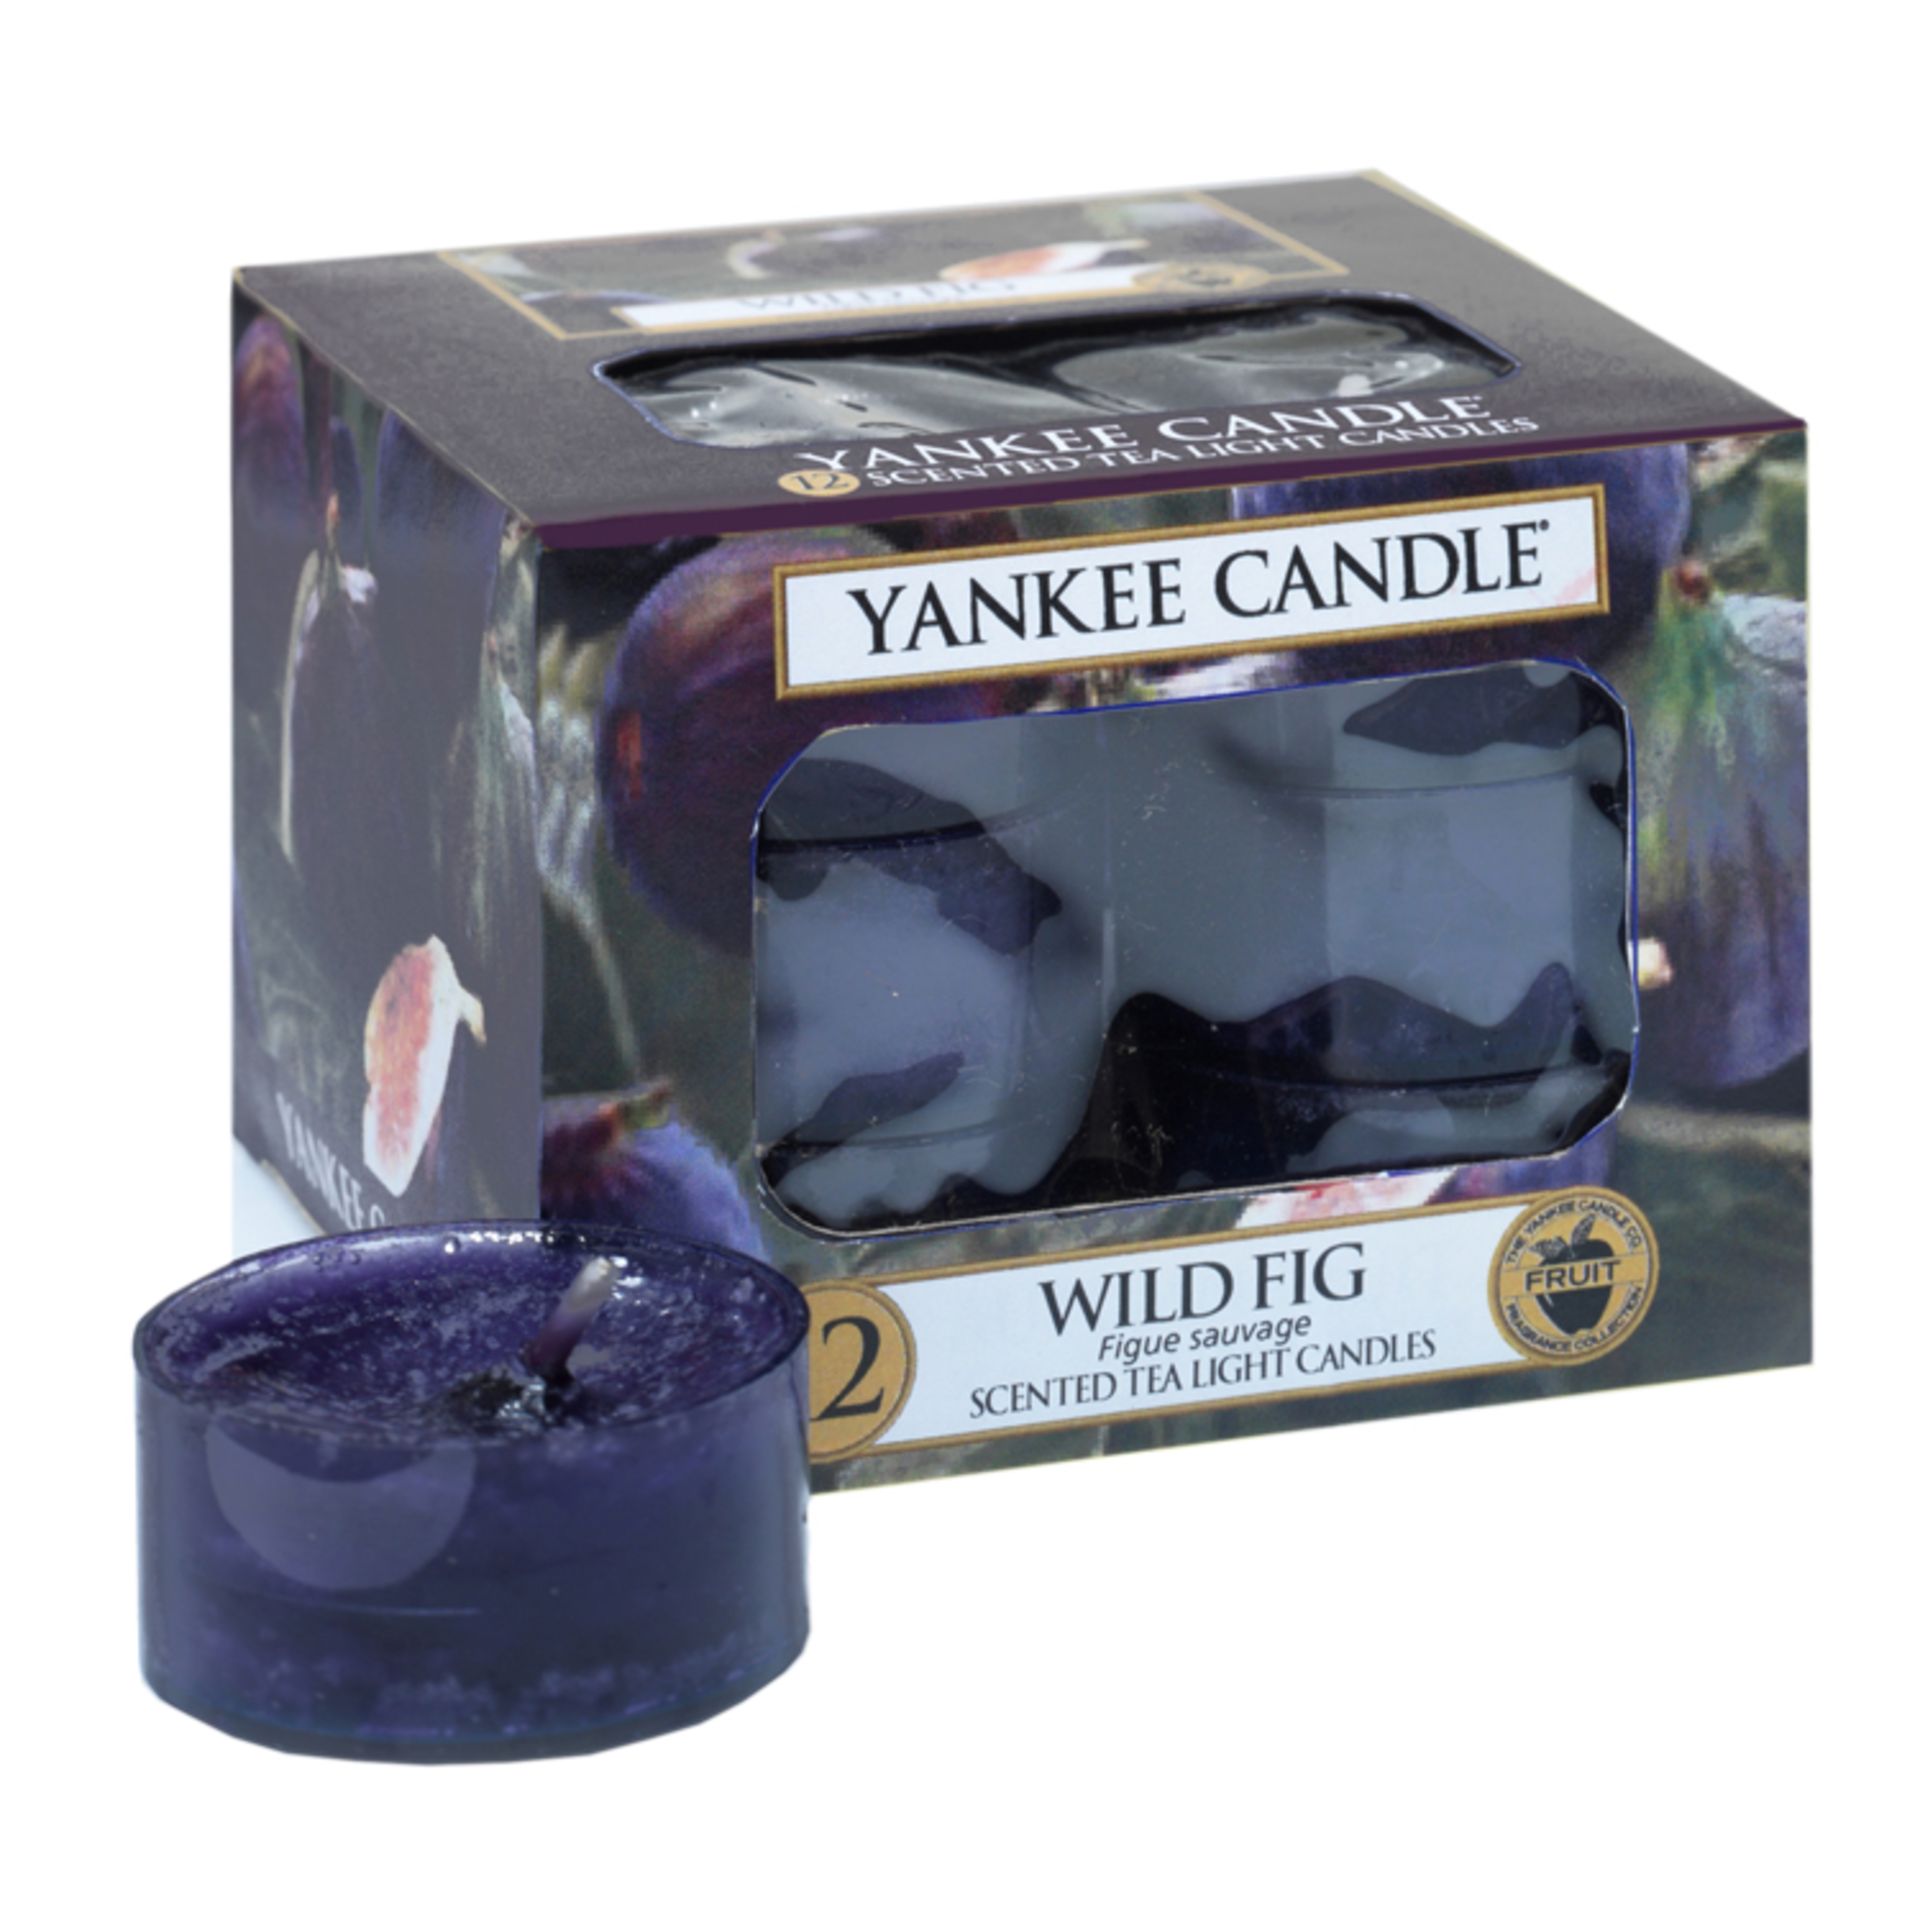 V *TRADE QTY* Brand New 12 Yankee Candle Scented Tea Light Candles Wild Fig eBay Price £7.75 X 4 - Image 2 of 3